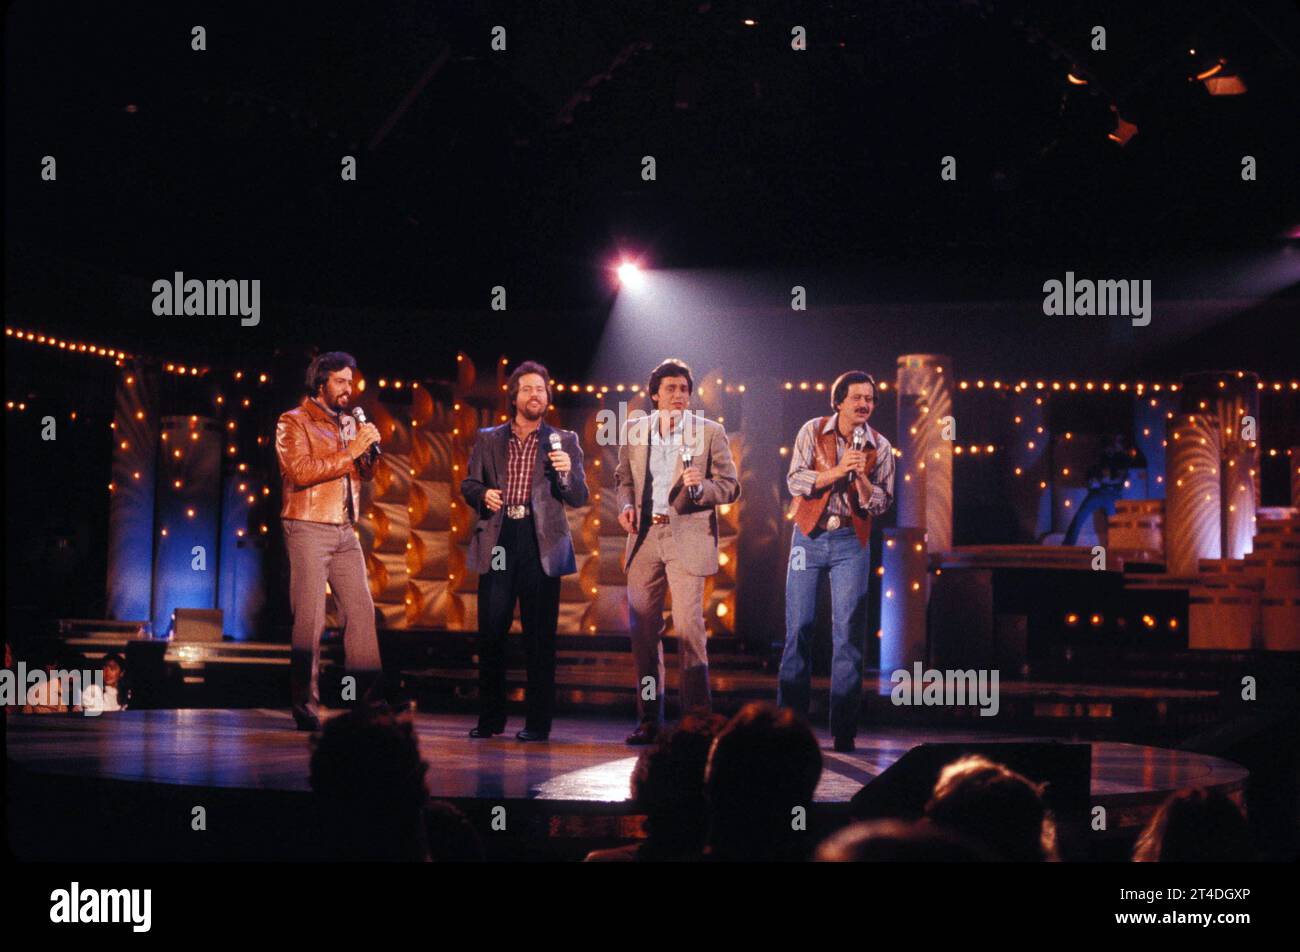 THE OSMOND BROTHERS ;THE OSMONDS ; American family music group who reached the height of their fame in the early to mid-1970s ; Alan Osmond, Wayne Osmond, Merrill Osmond , Jay Osmond, Donny Osmond, Marie Osmond, Jimmy Osmond ;  Credit: Lynn Mcafee / Performing Arts Images www.performingartsimages.com Stock Photo